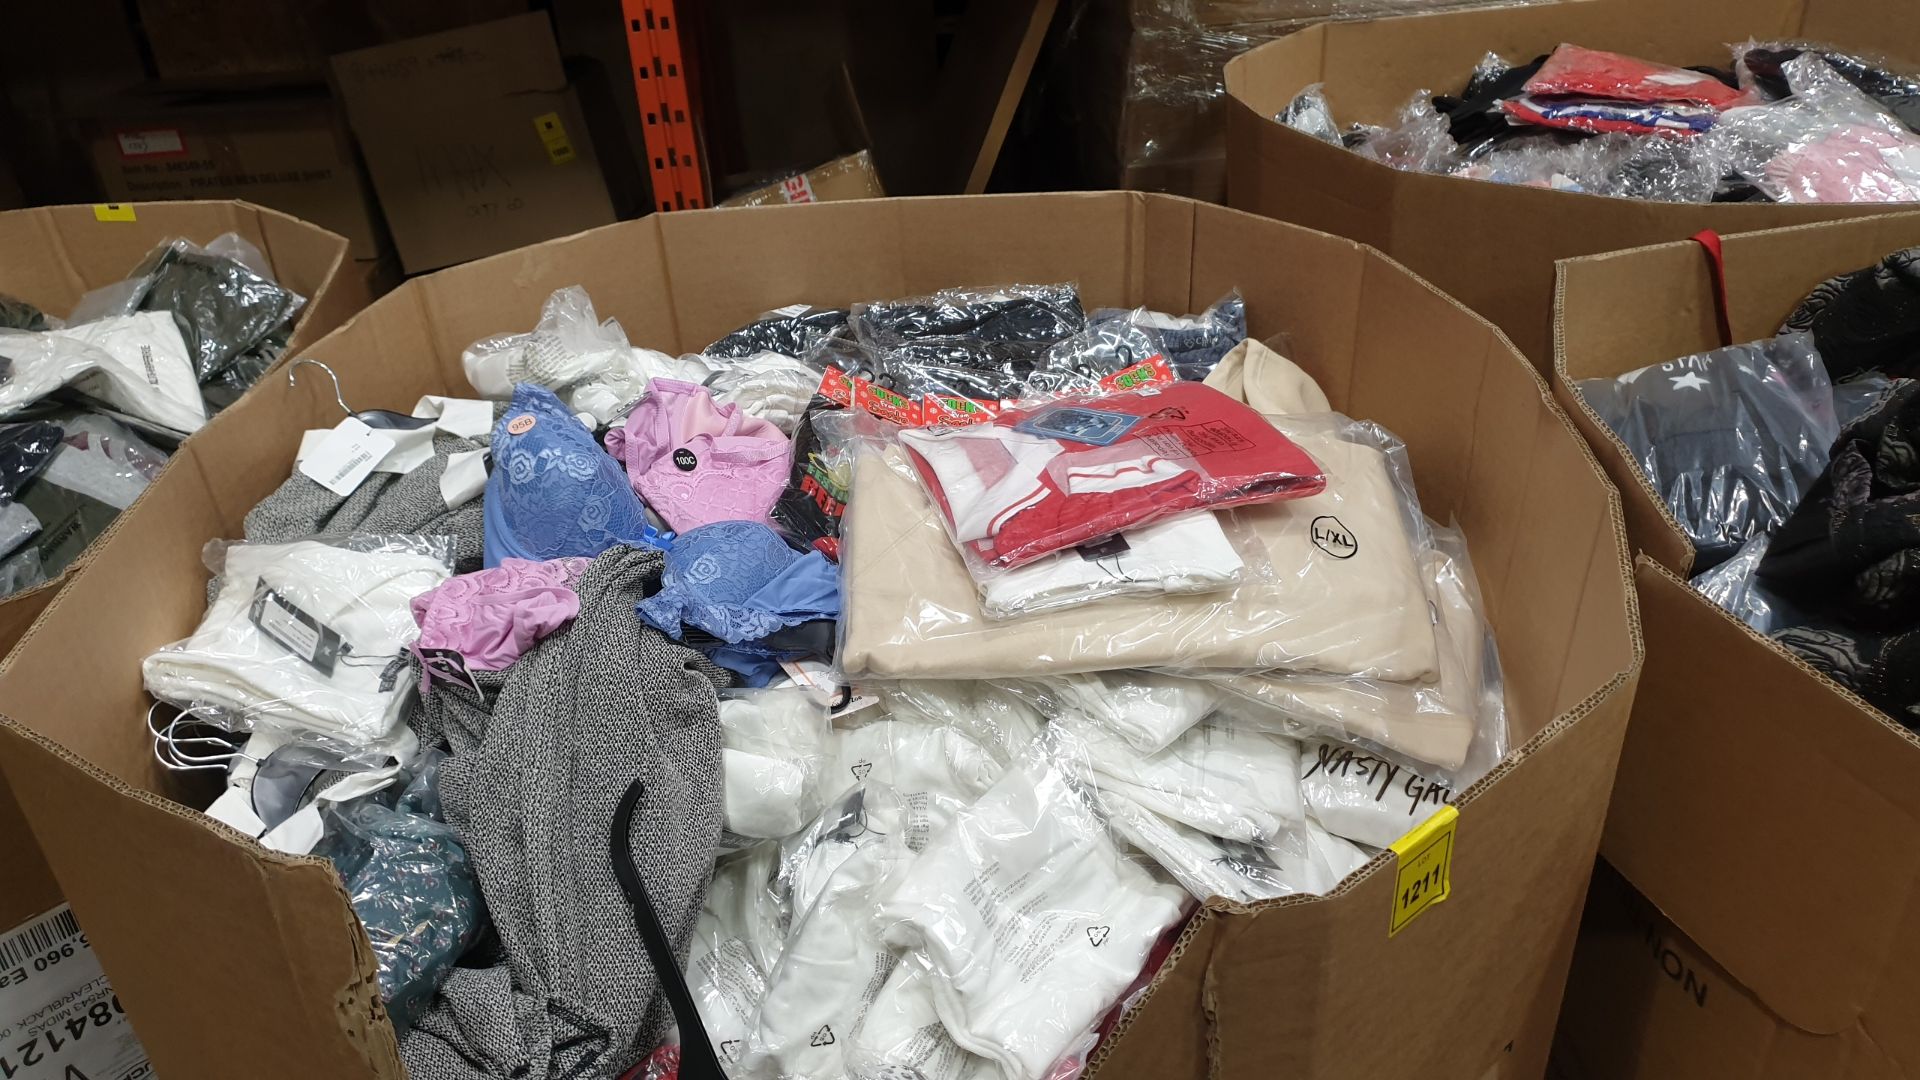 FULL PALLET OF CLOTHING IE NASTY GAL COLLECTION BODYCON DRESSES, AVENTO SPORT SHIRTS, LILI & ZOE